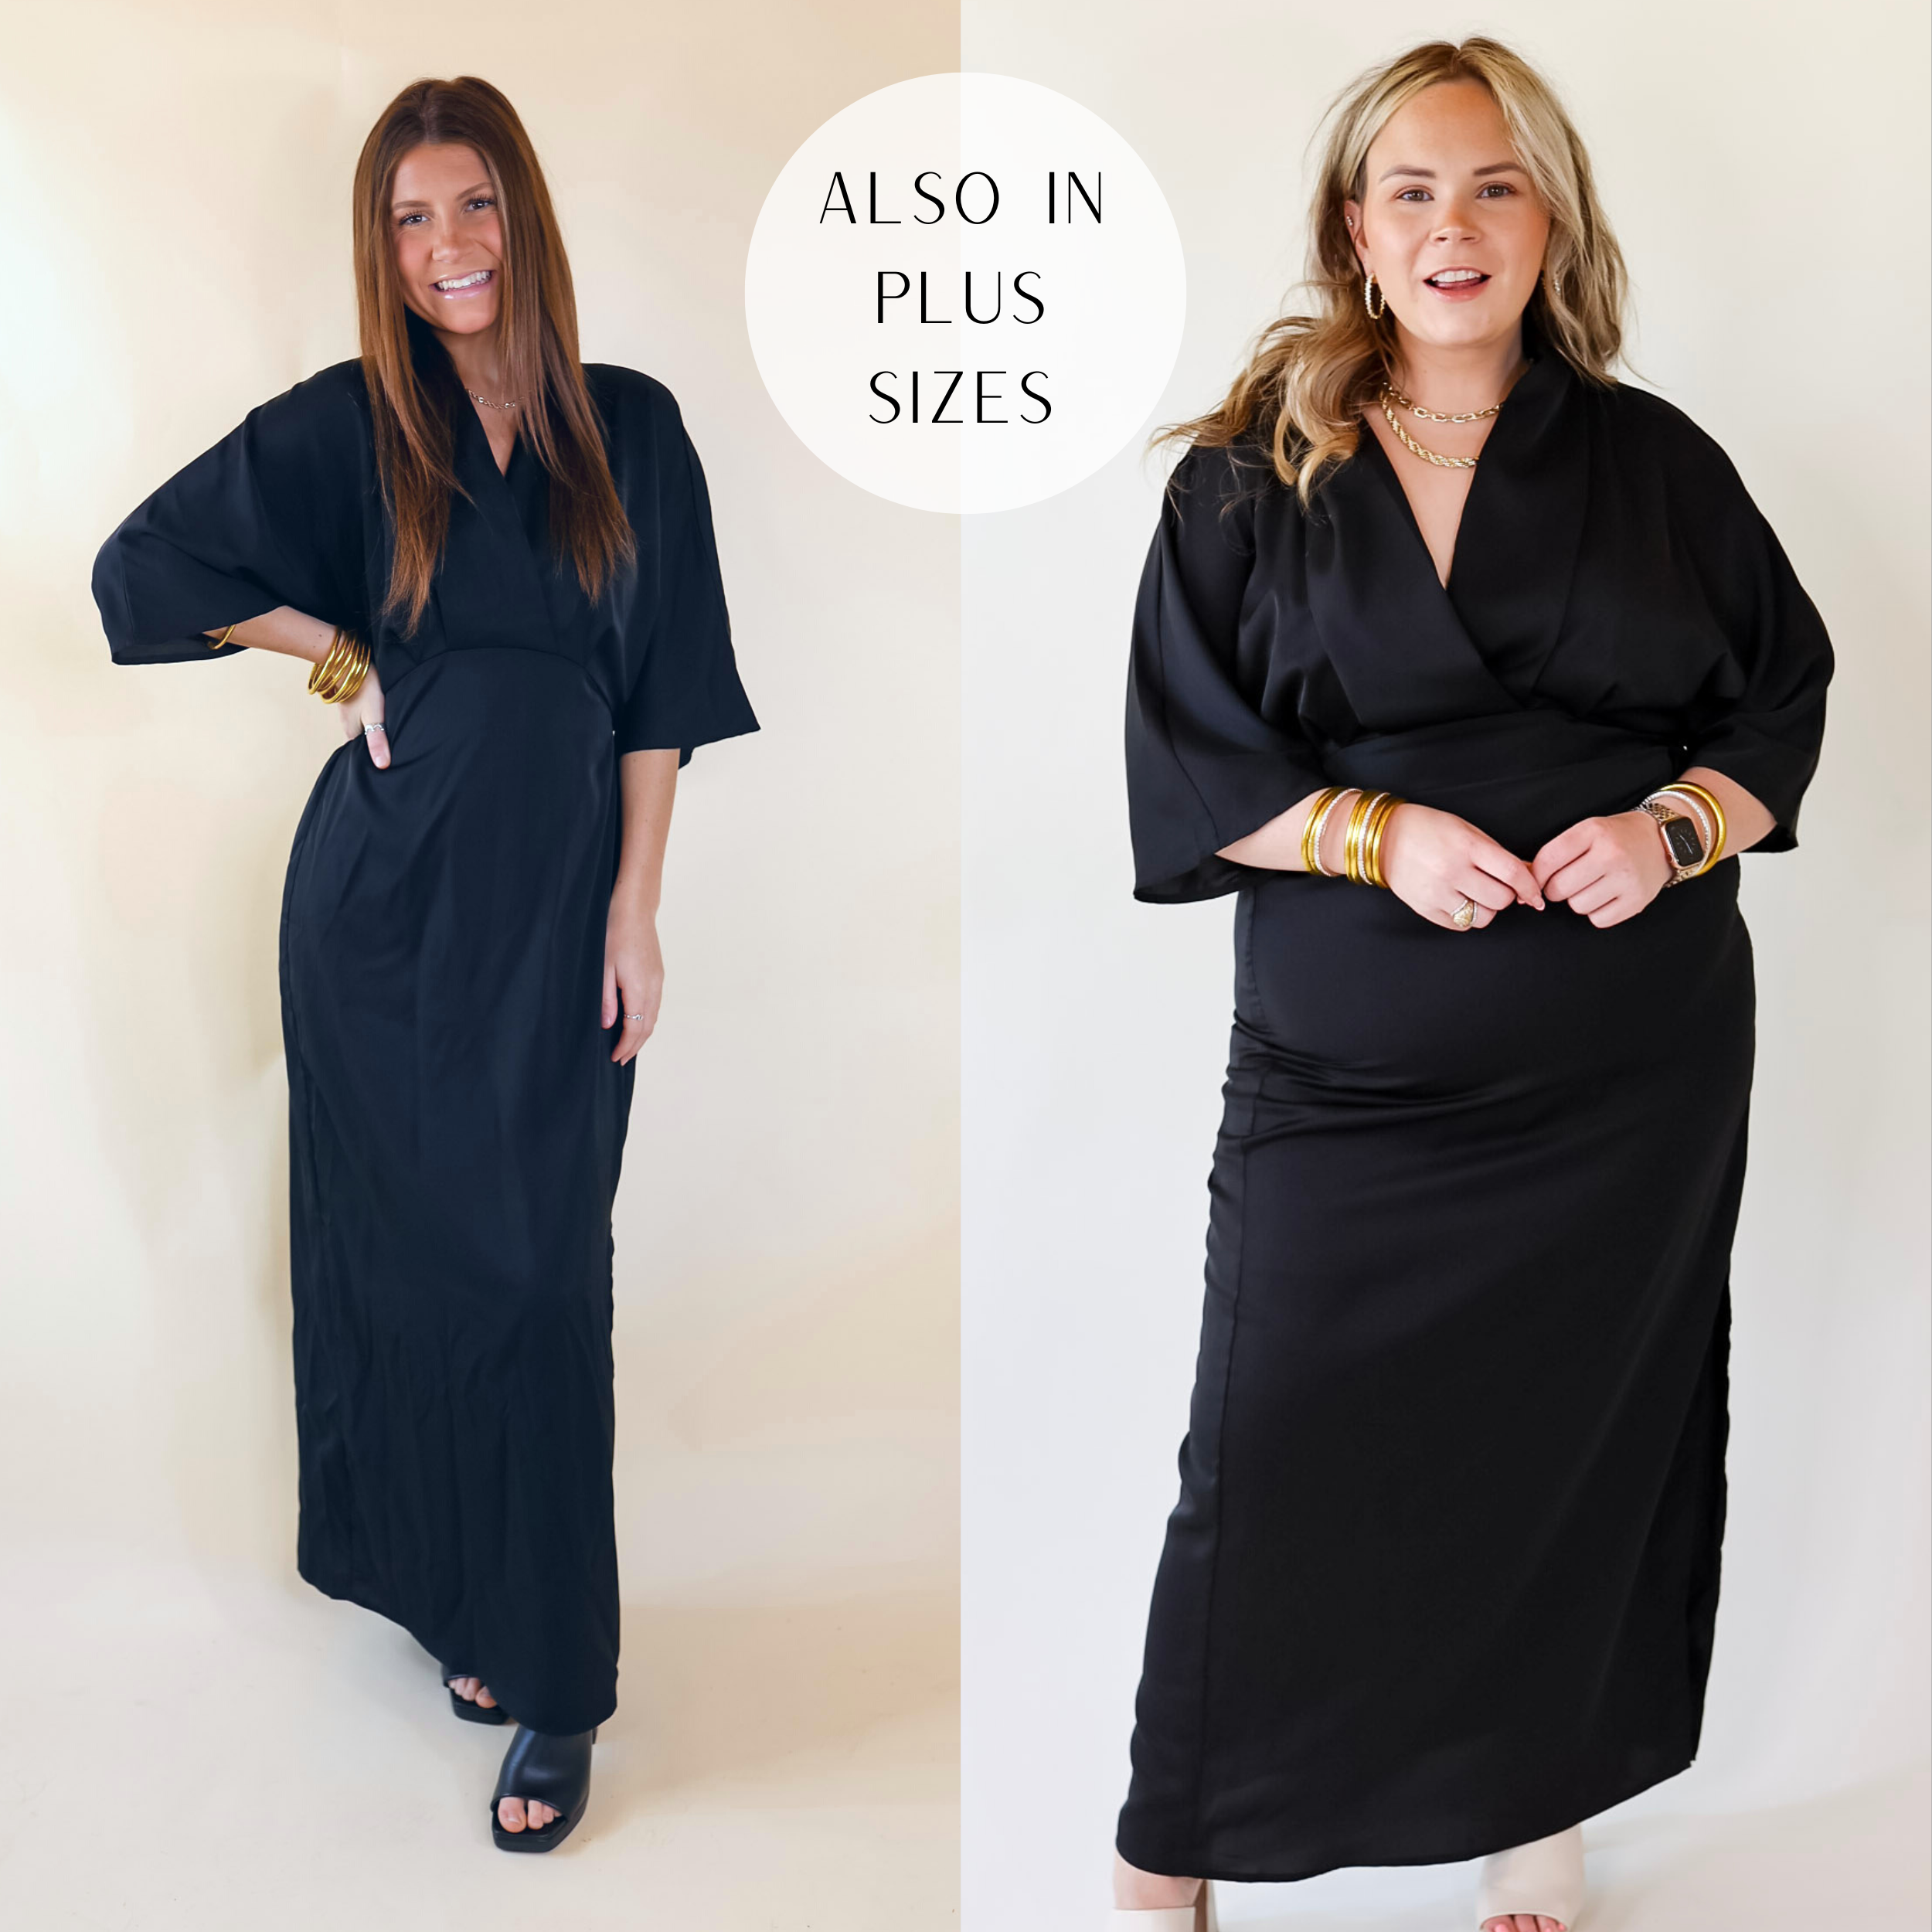 Models are wearing a black silky maxi dress featuring half sleeves, a leg slit, and a cross front.